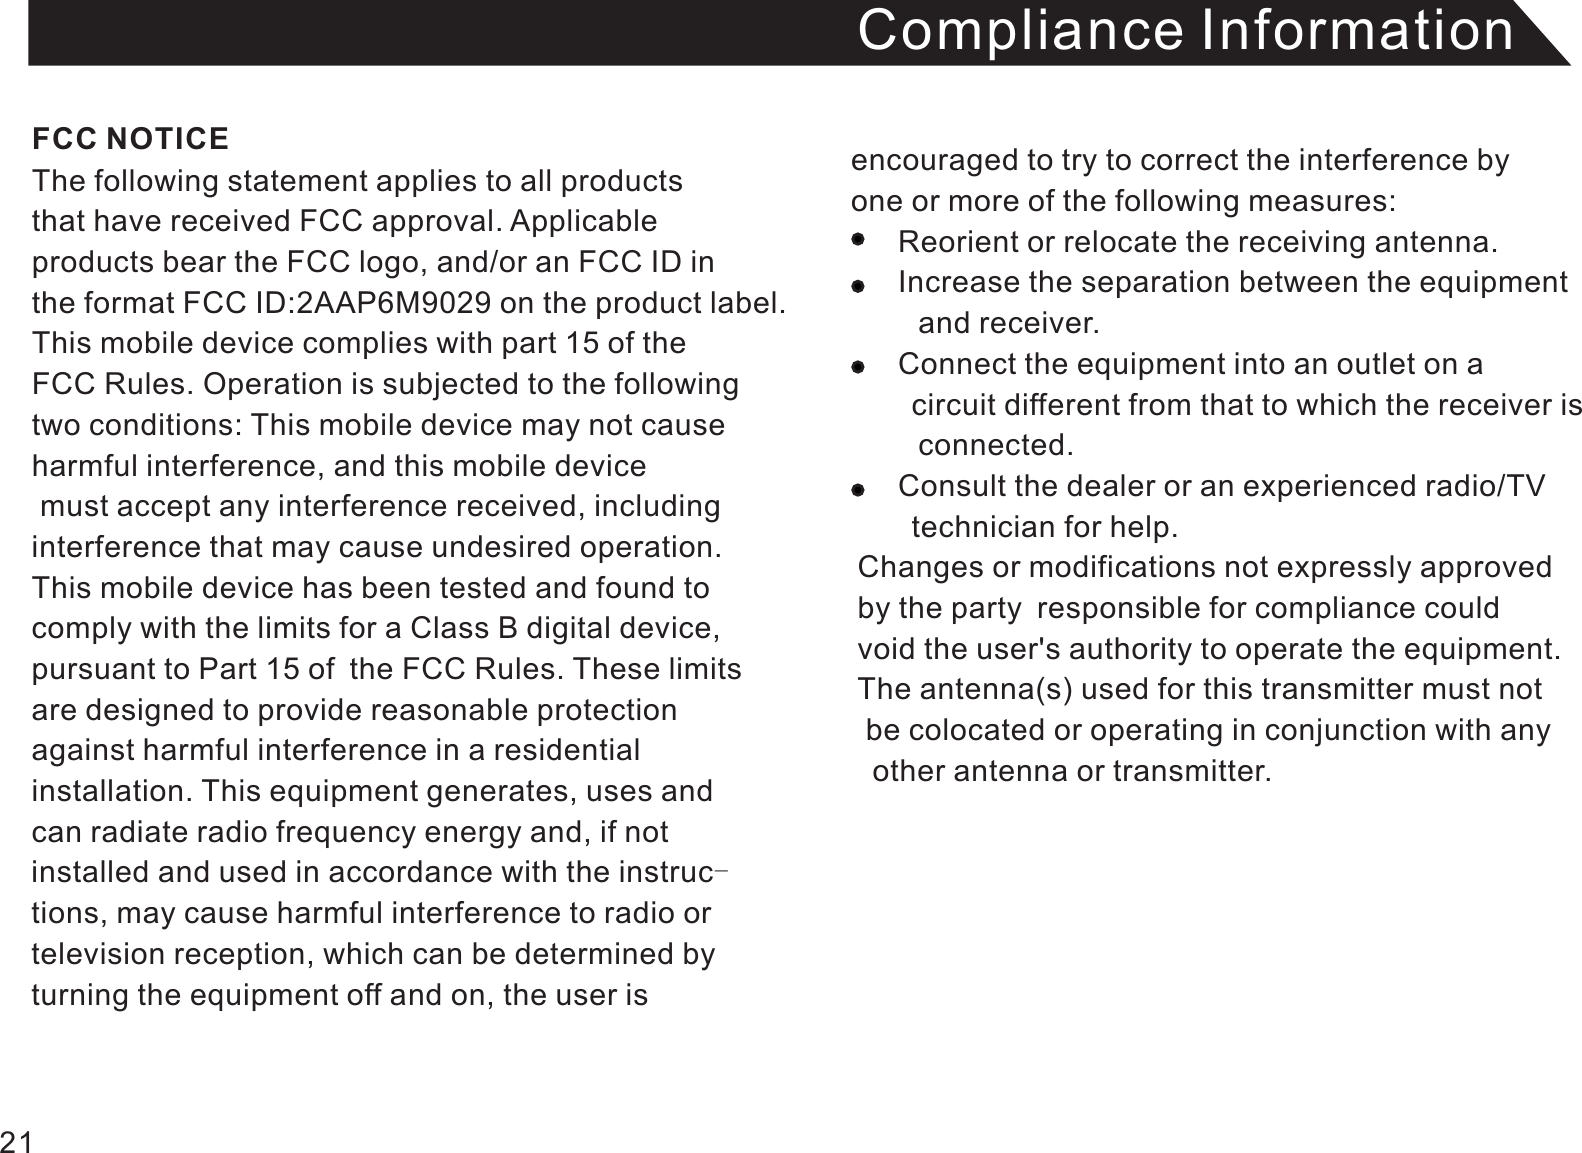 Compliance InformationThe following statement applies to all products that have received FCC approval. Applicable products bear the FCC logo, and/or an FCC ID in the format FCC ID:2AAP6M9029 on the product label.This mobile device complies with part 15 of the FCC Rules. Operation is subjected to the following two conditions: This mobile device may not cause harmful interference, and this mobile device must accept any interference received, including interference that may cause undesired operation. This mobile device has been tested and found to comply with the limits for a Class B digital device, pursuant to Part 15 of the FCC Rules. These limitsare designed to provide reasonable protectionagainst harmful interference in a residential installation. This equipment generates, uses andcan radiate radio frequency energy and, if not installed and used in accordance with the instruc-tions, may cause harmful interference to radio or television reception, which can be determined by turning the equipment off and on, the user is encouraged to try to correct the interference by one or more of the following measures:          Reorient or relocate the receiving antenna.     Increase the separation between the equipment     and receiver.     Connect the equipment into an outlet on a     circuit different from that to which the receiver is      connected.     Consult the dealer or an experienced radio/TV     technician for help. Changes or modifications not expressly approved  by the party responsible for compliance could void the user&apos;s authority to operate the equipment. The antenna(s) used for this transmitter must not  be colocated or operating in conjunction with any   other antenna or transmitter. FCC NOTICE21